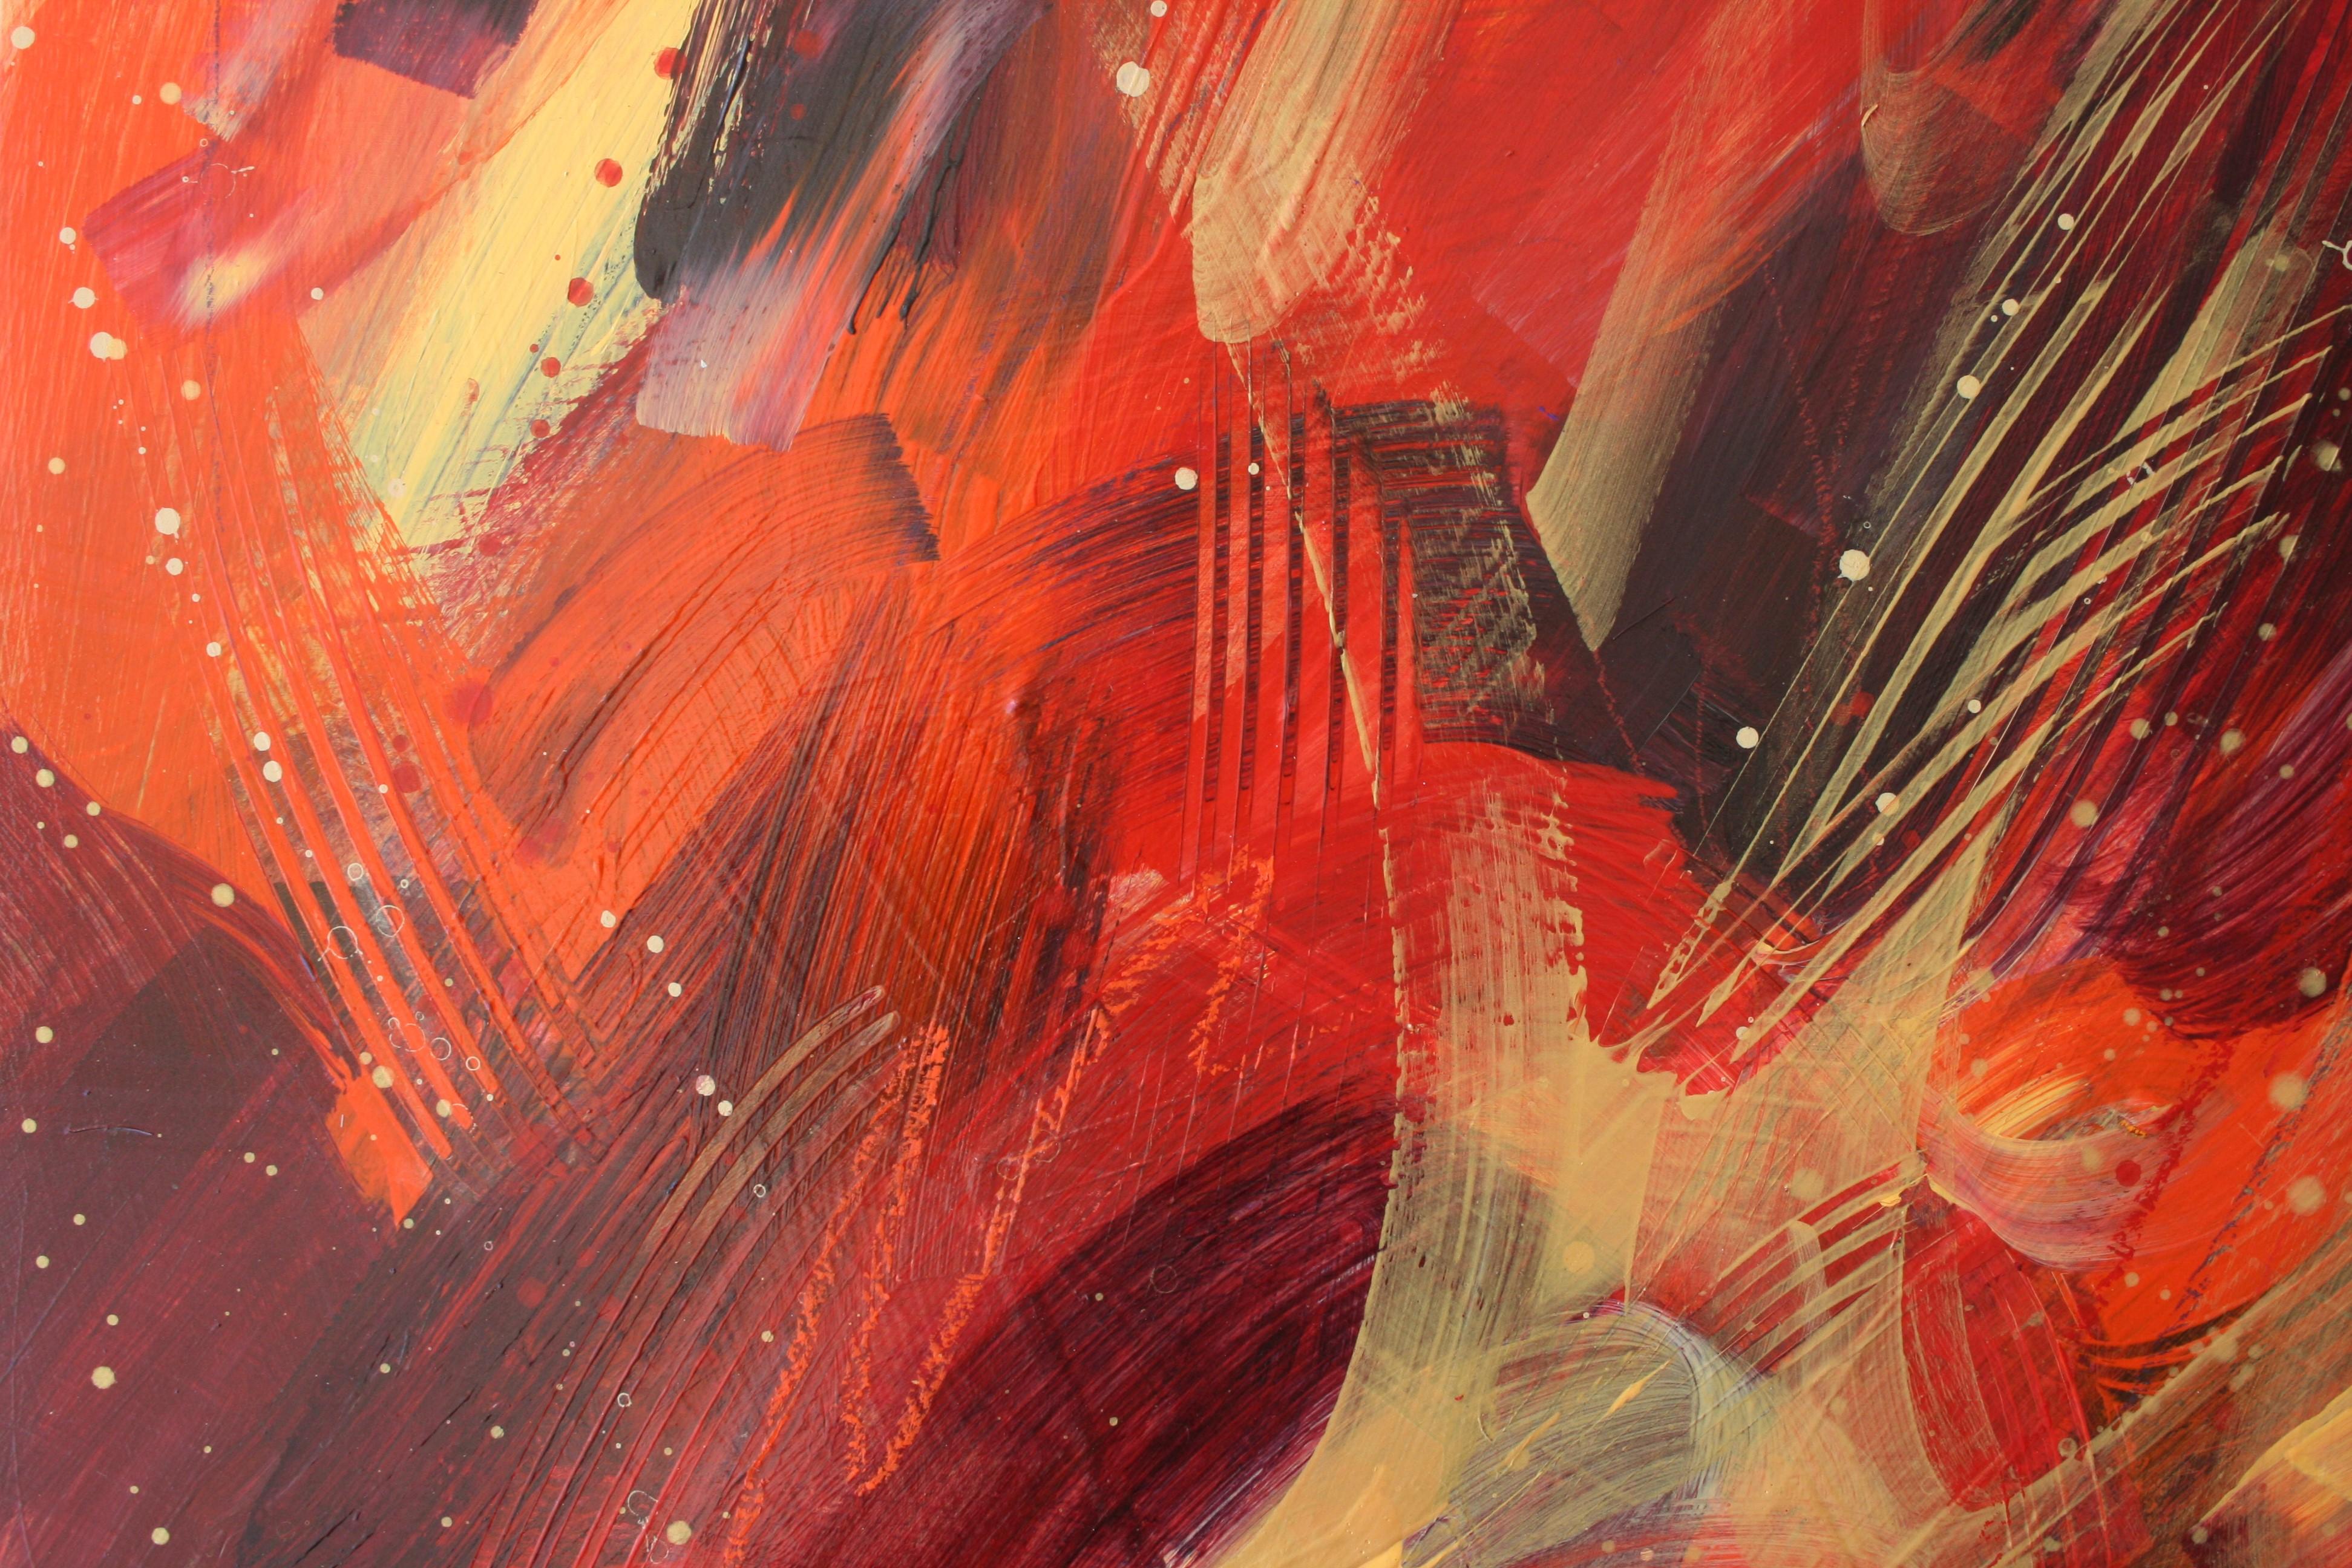 <p>Artist Comments<br>Artist Courtney Jacobs offers a lively burst of warm colors in this expressive abstract painting. Vibrant hues of red, yellow, orange, and plum move in energetic strokes with splatters dotting layers of paint. For Courtney